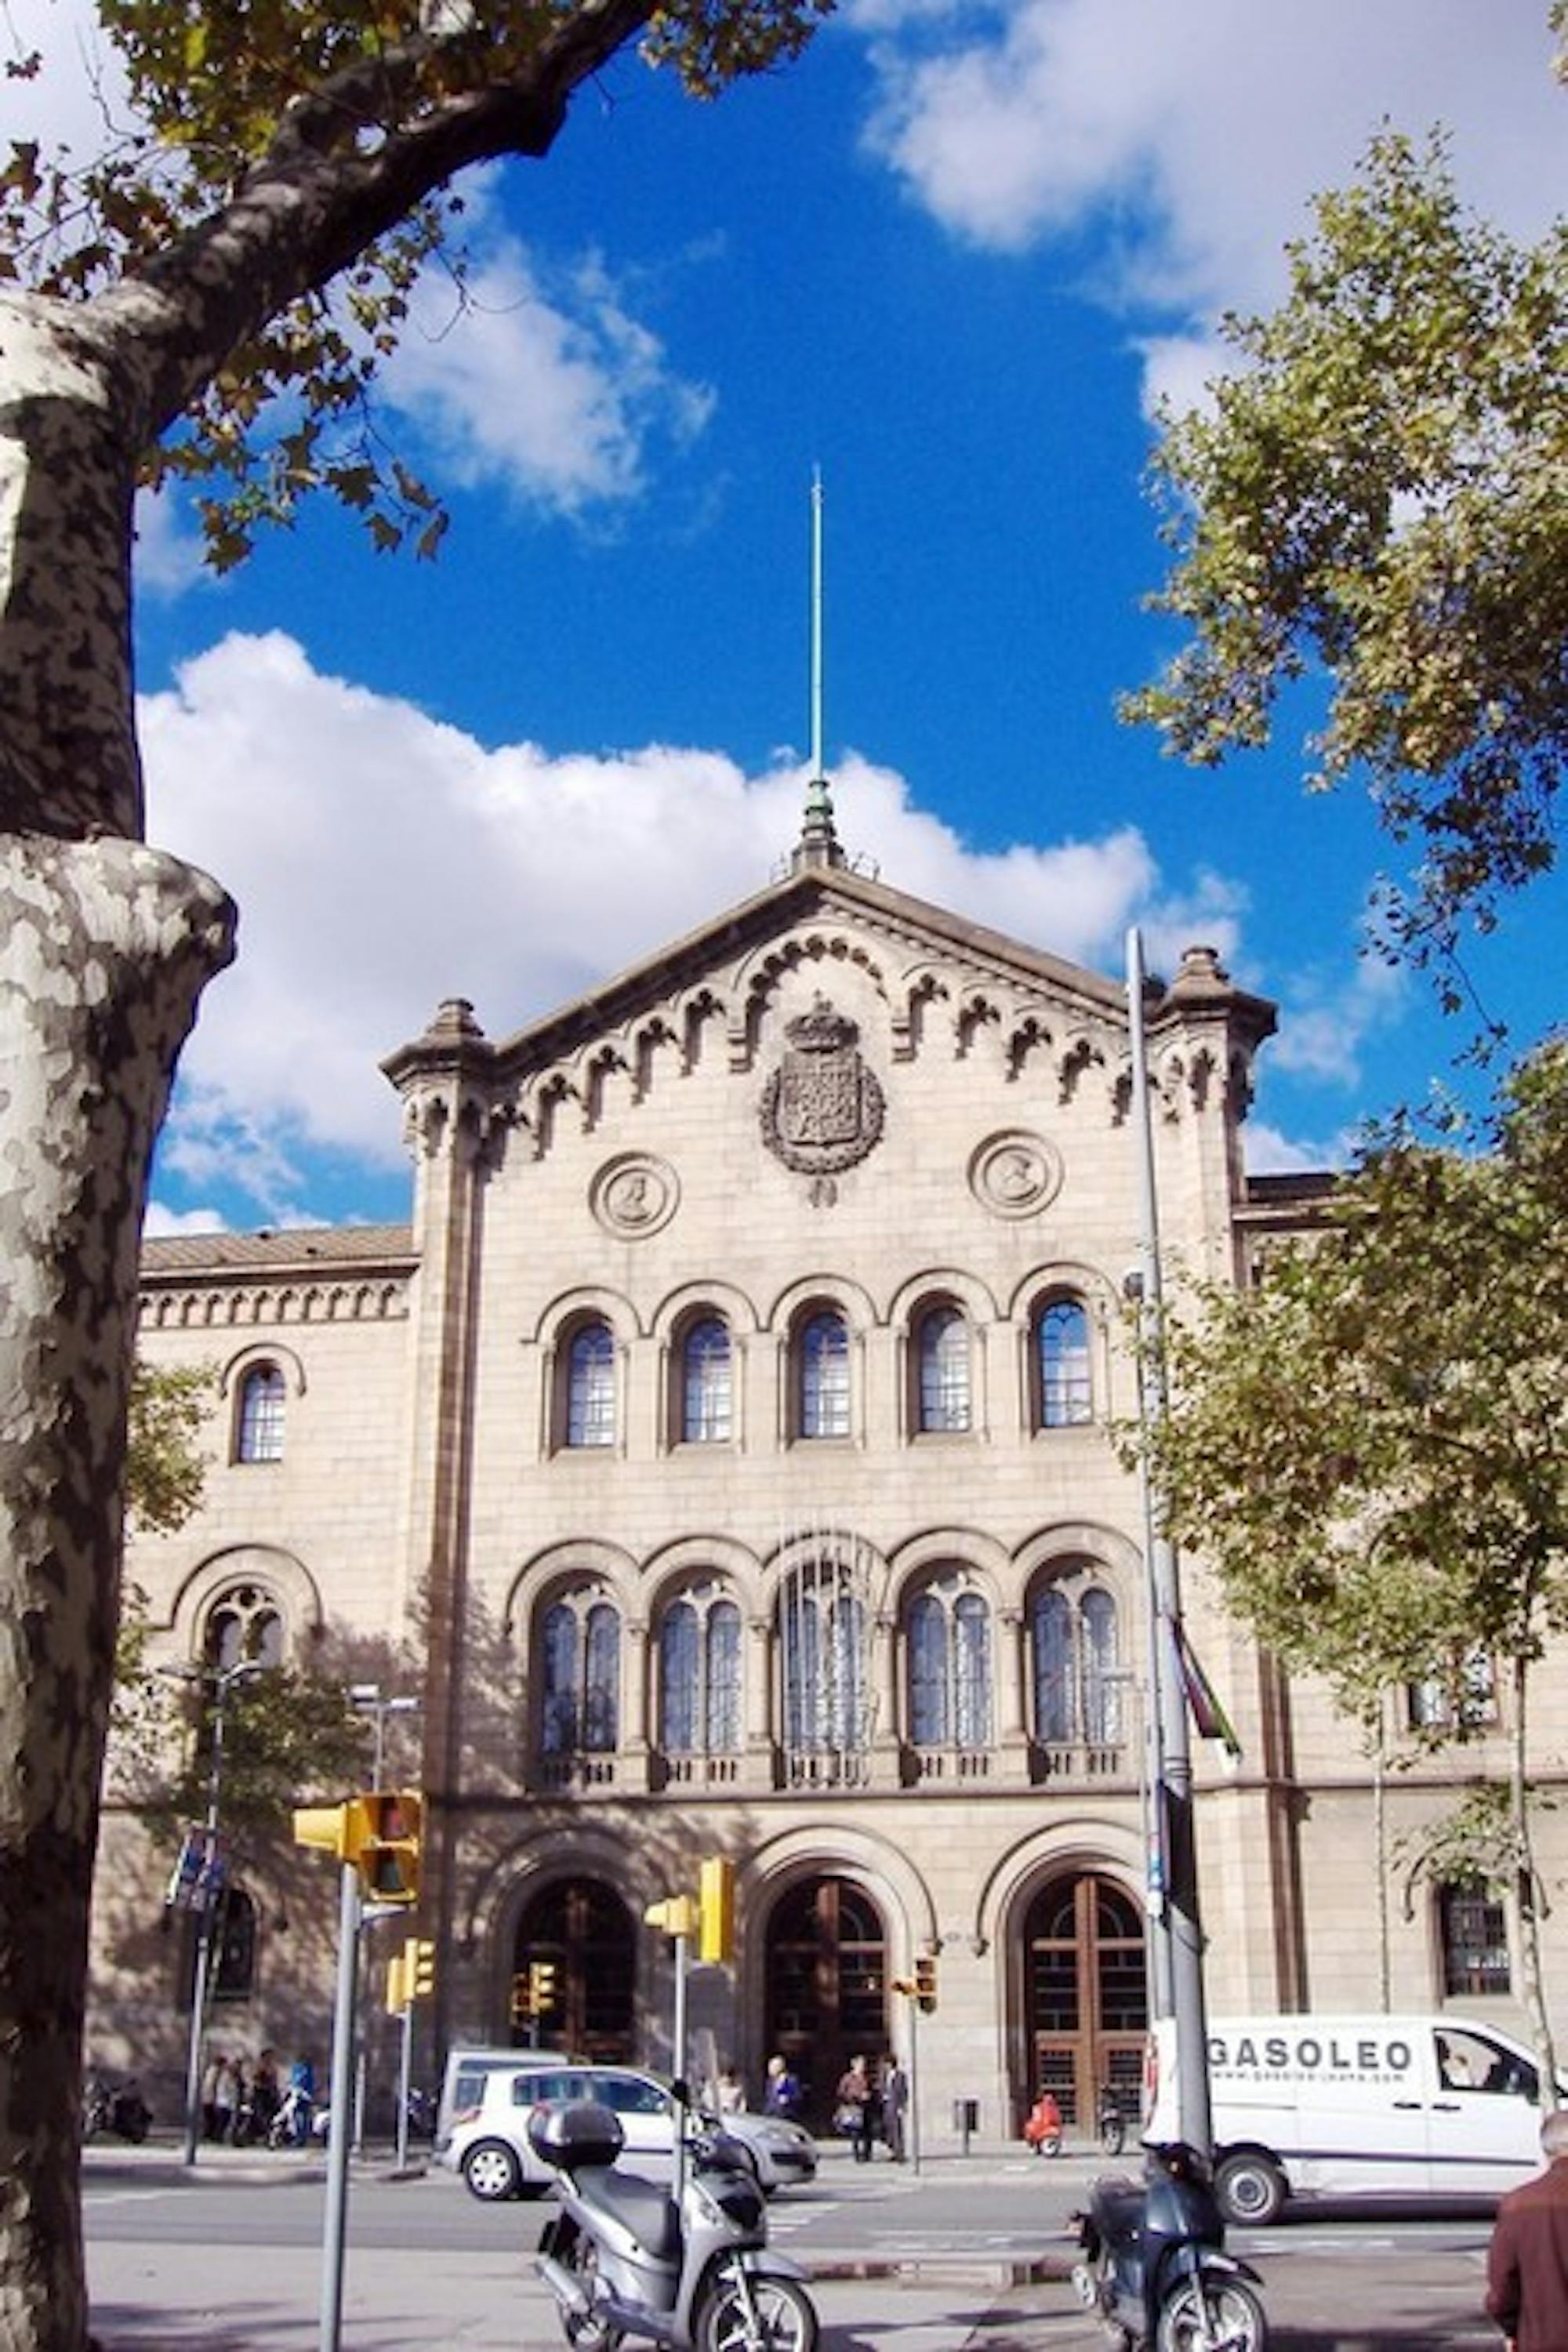 The Spanish LSA in Spain is located at the University of Barcelona -- one of many colleges worldwide to host Dartmouth foreign study programs.